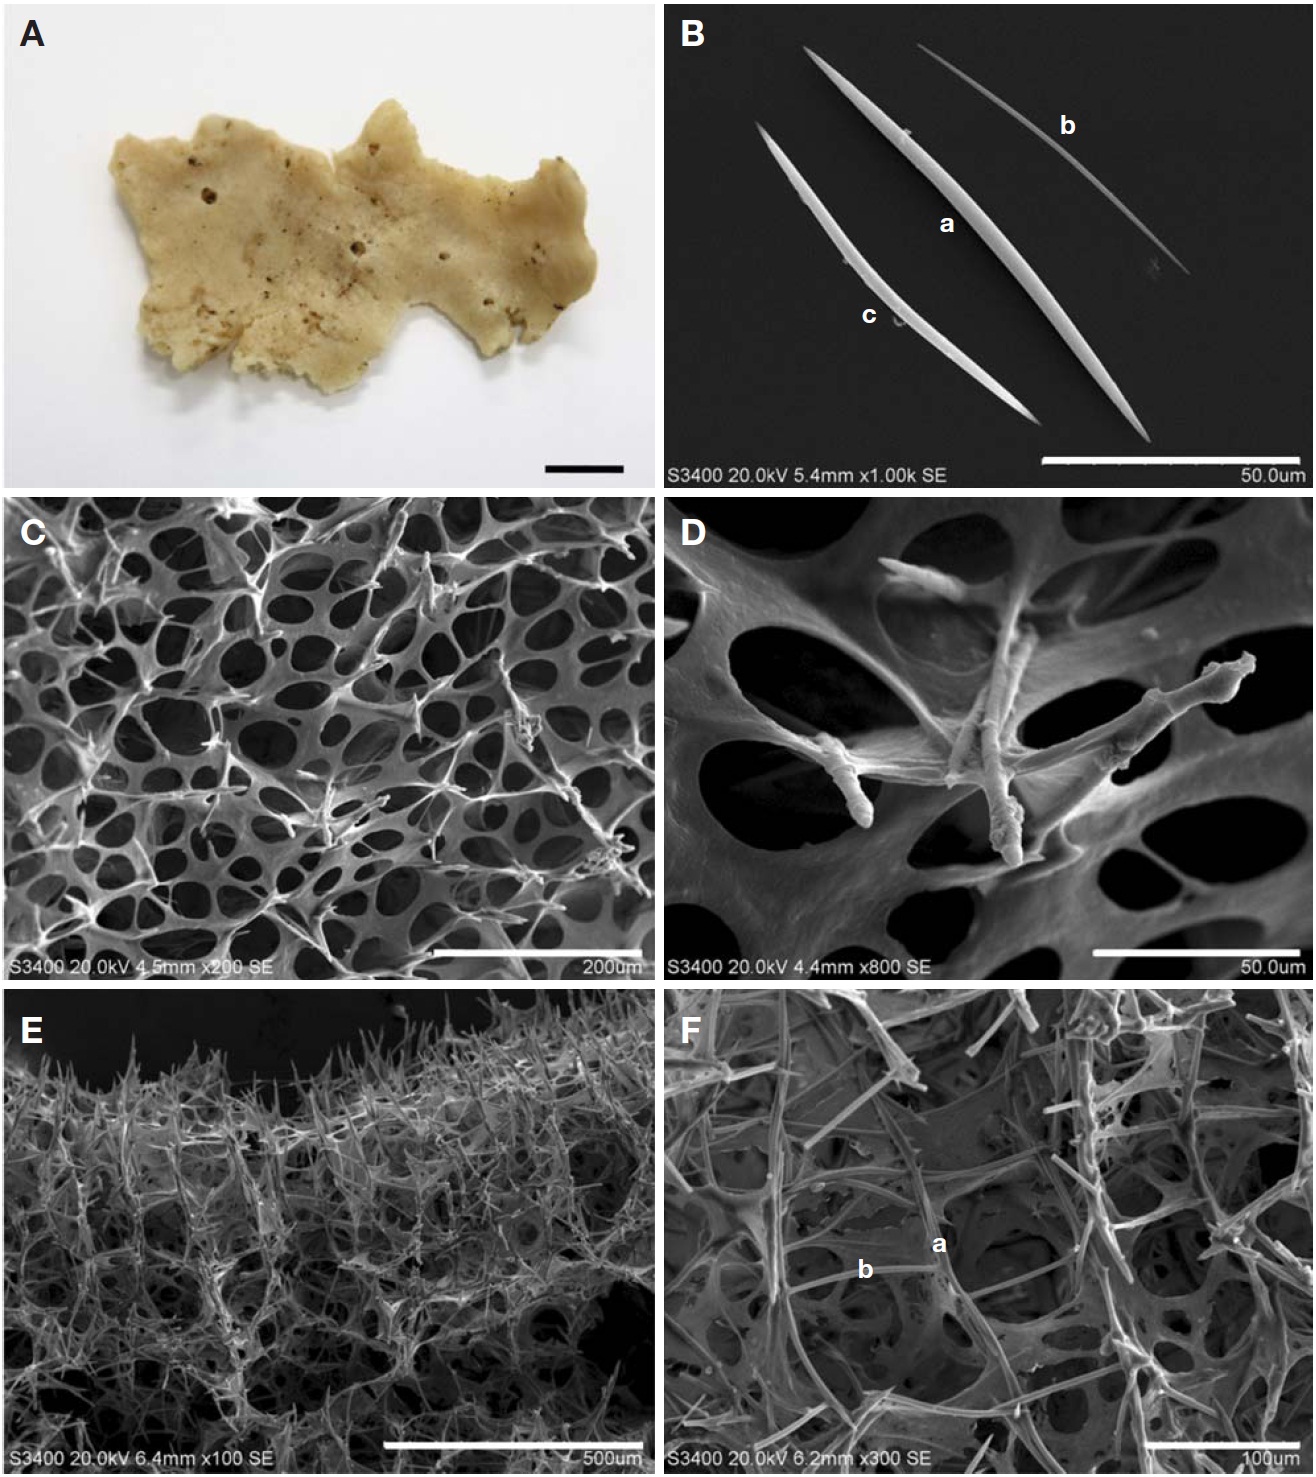 Haliclona (Haliclona) tonggumiensis n. sp. A, Entire animal; B, Spicule (thick oxea [a], thin oxea [b], bent of oxea at the middle [c]); C, D, Surface structure; E, Chaonosomal skeleton; F, Choanosomal skeleton (uni-paucispicular primary lines [a], regularly connected by unispicular secondary lines [b]). Scale bars: A=1 cm, B, D=50 μm, C=200 μm, E=500 μm, F=100 μm.